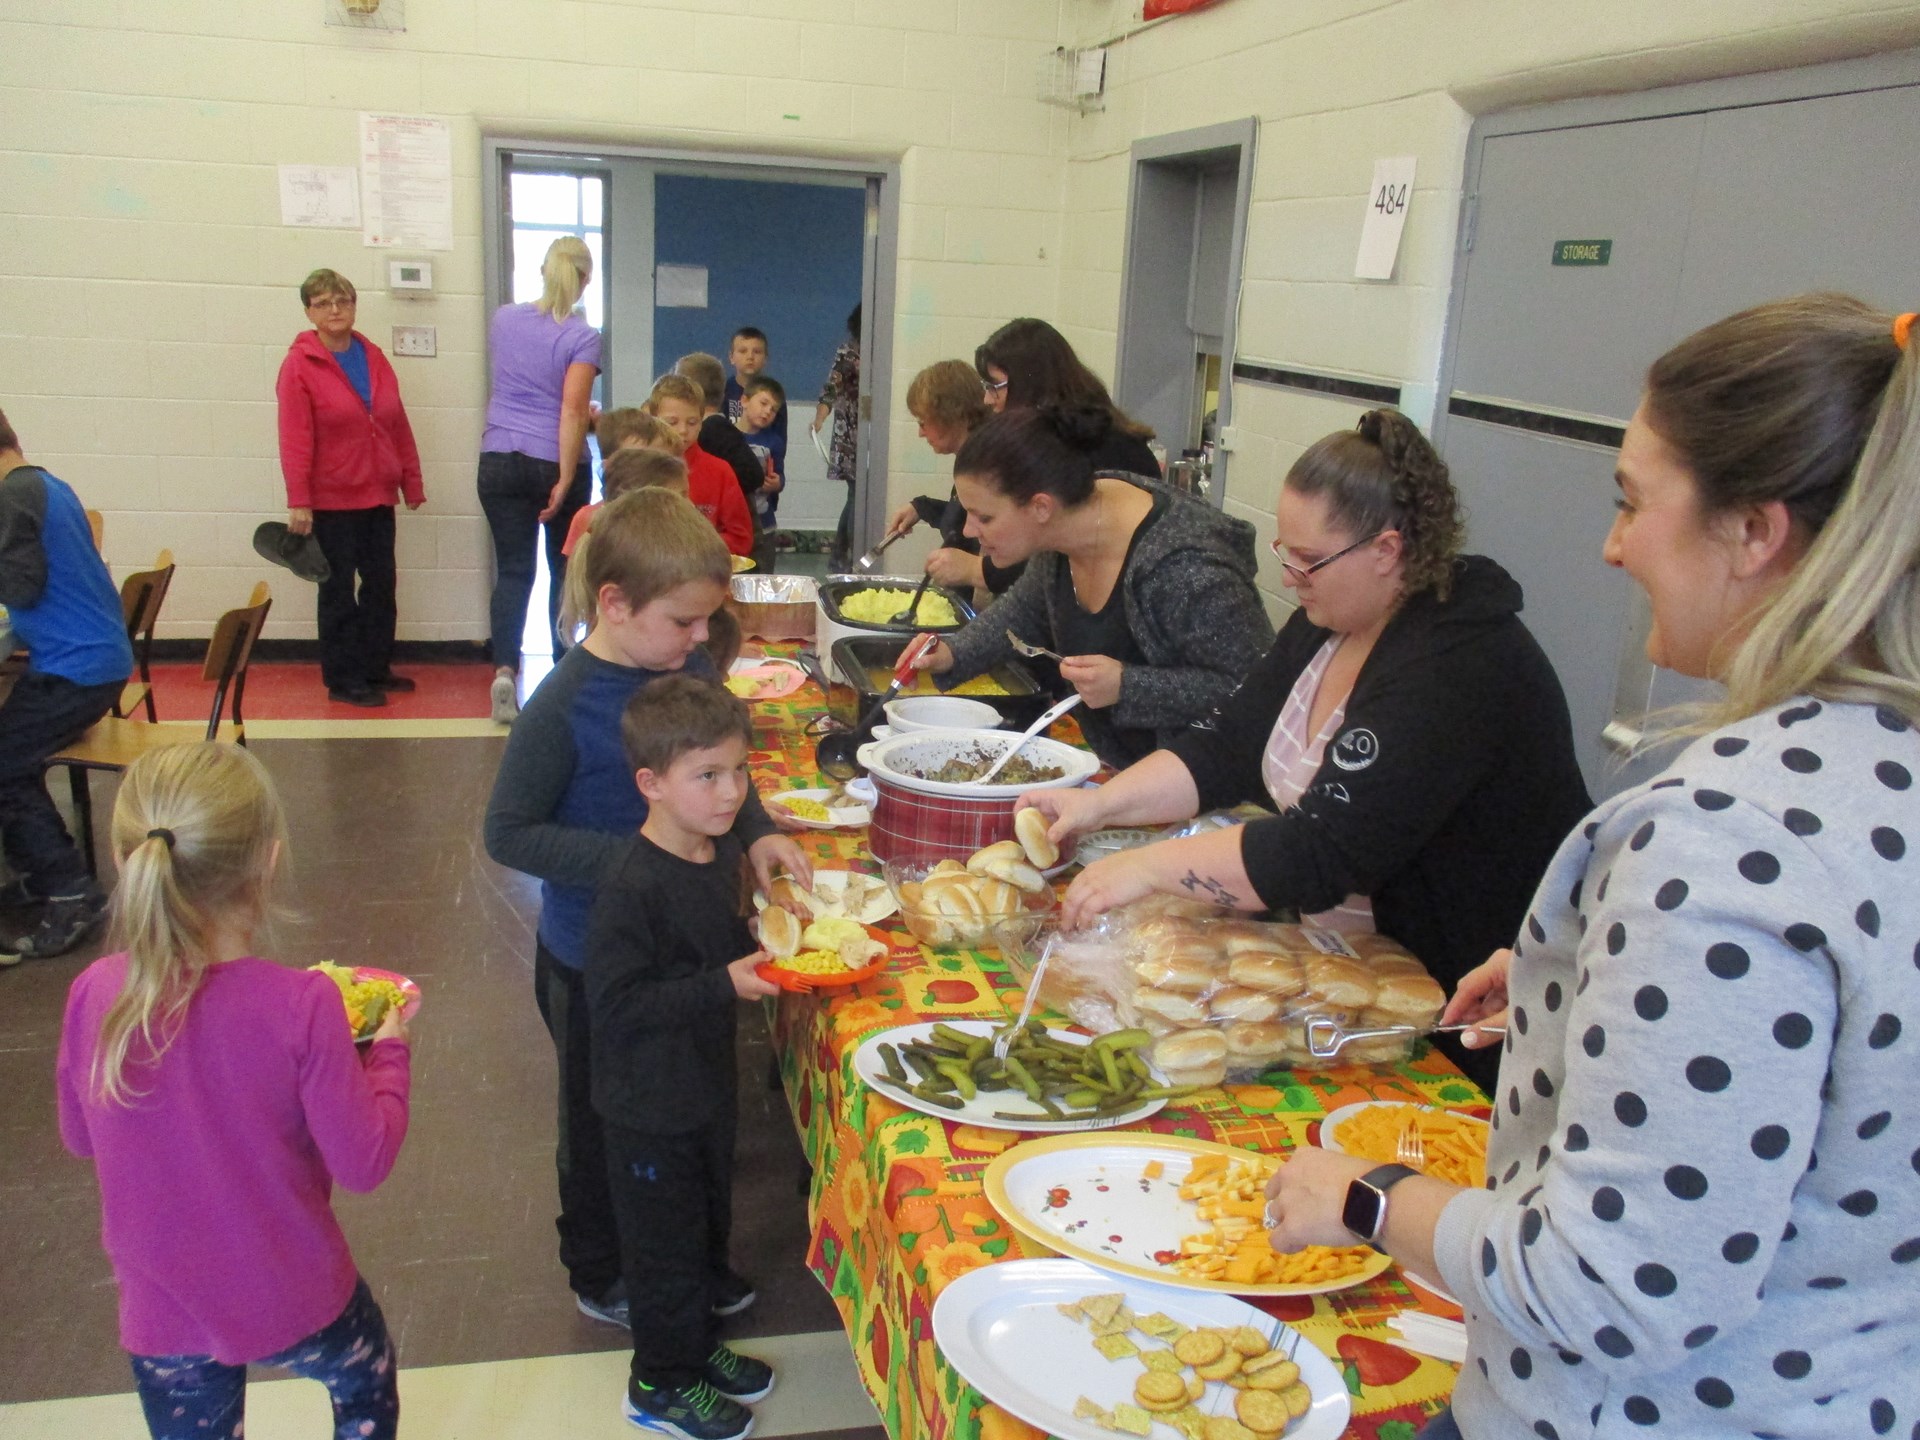 Parents helping serve a special lunch.